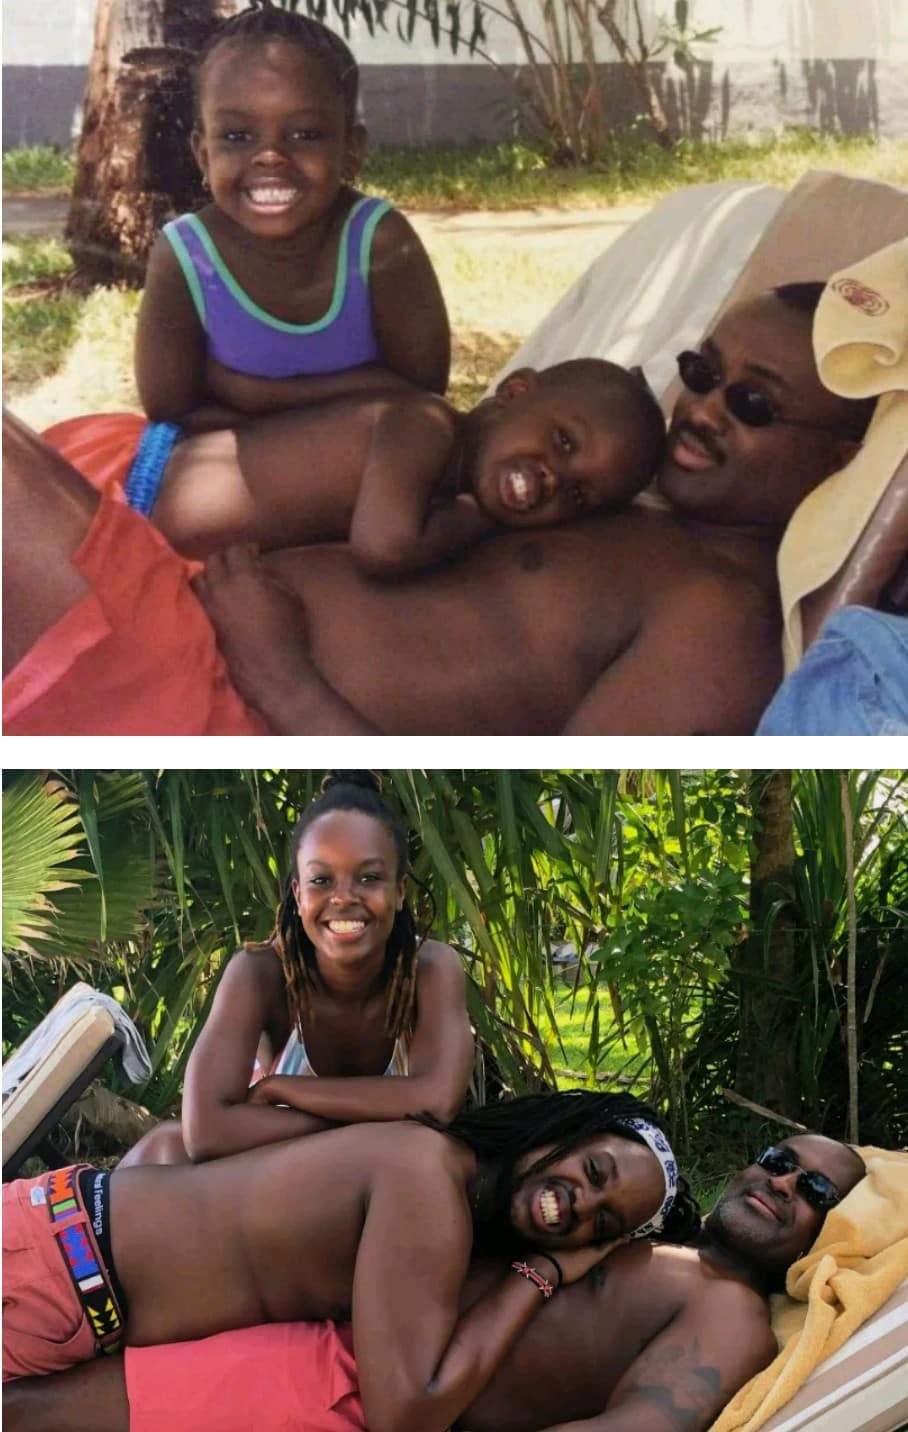 Kenyan artist recreates childhood photo with his dad and sister